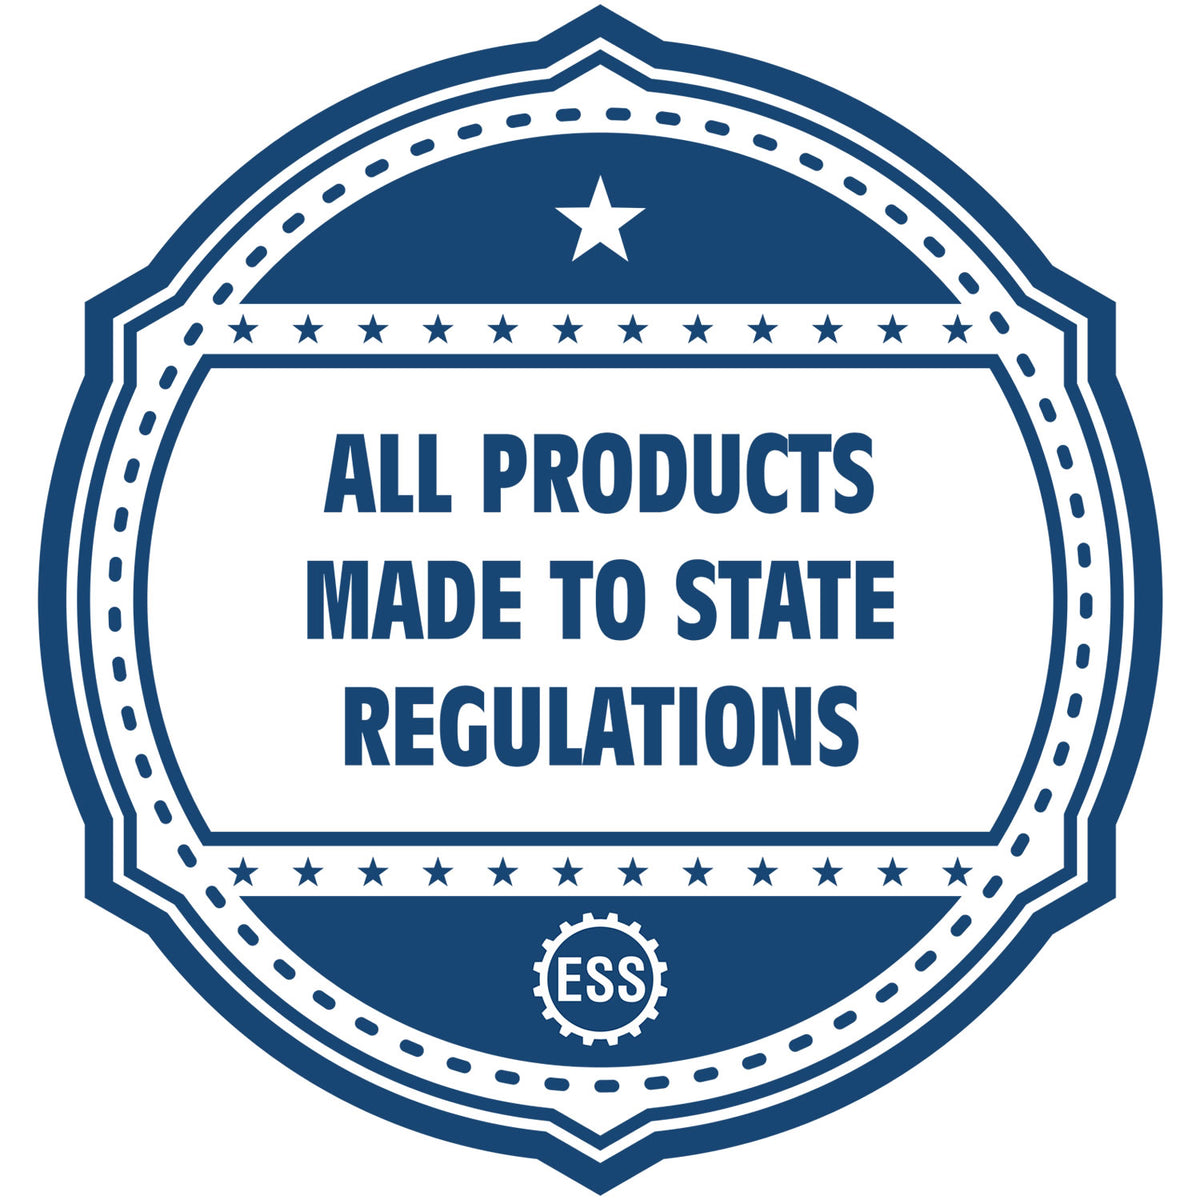 An icon or badge element for the Soft Pocket Indiana Landscape Architect Embosser showing that this product is made in compliance with state regulations.